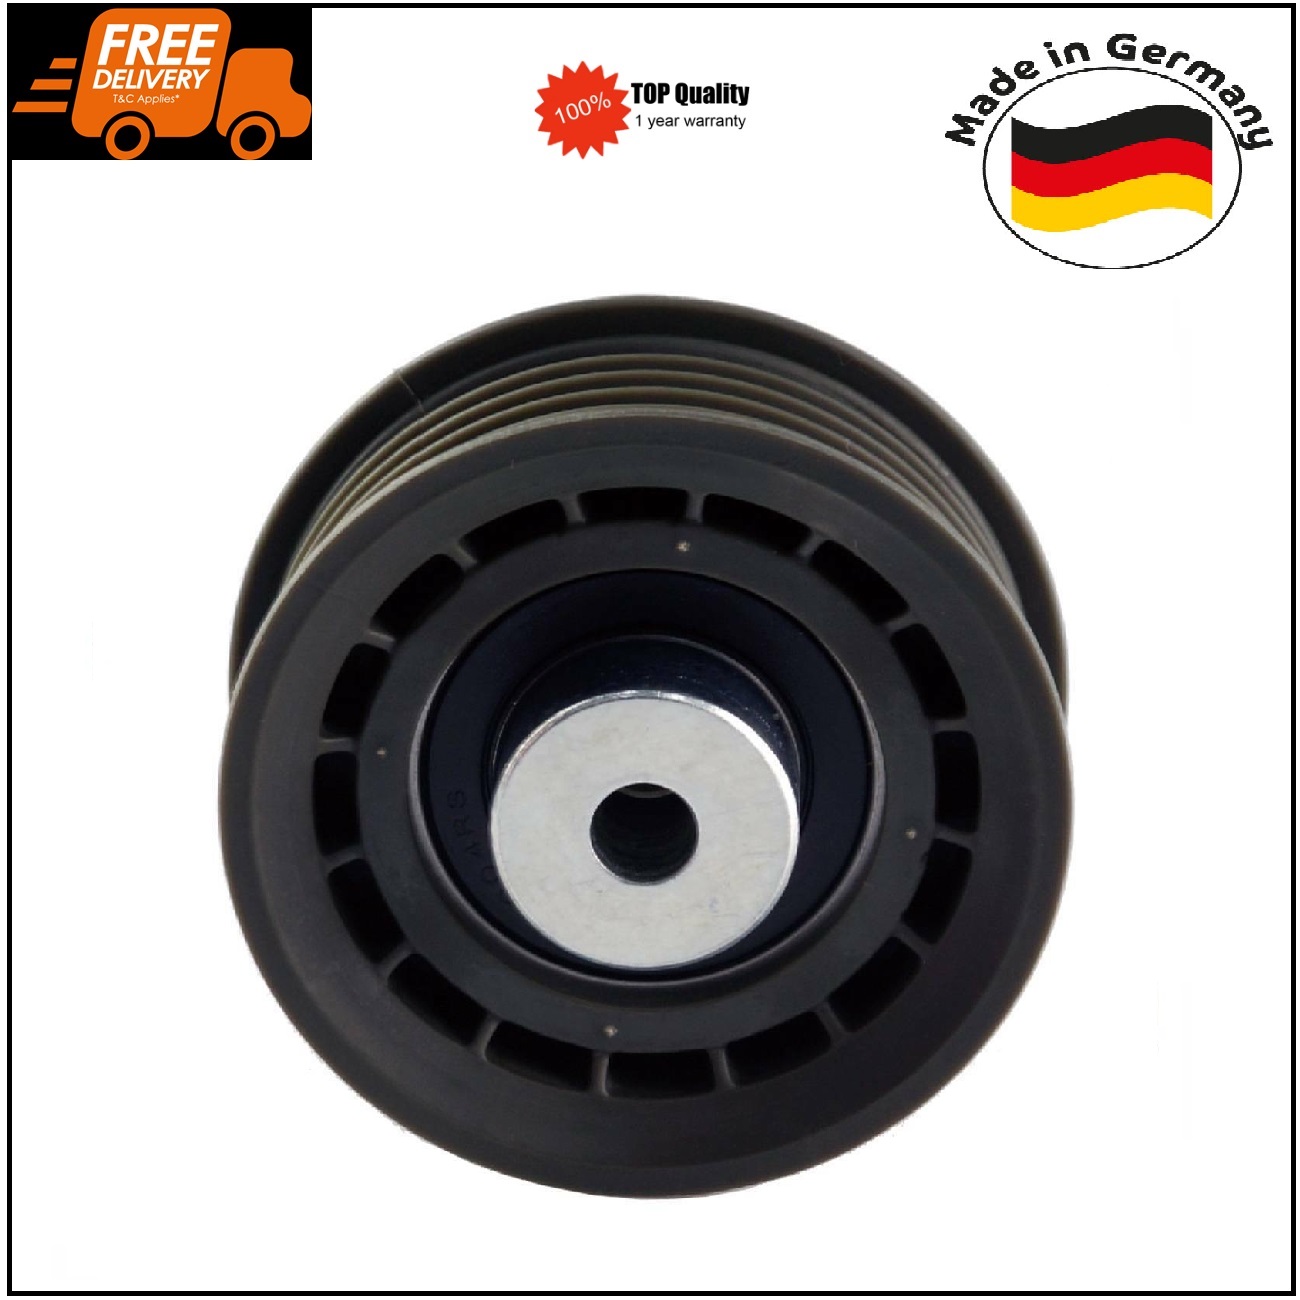 Drive Belt Tensioner Pulley for Mercedes W202 W124 W210 W140 A6012001070 German Made